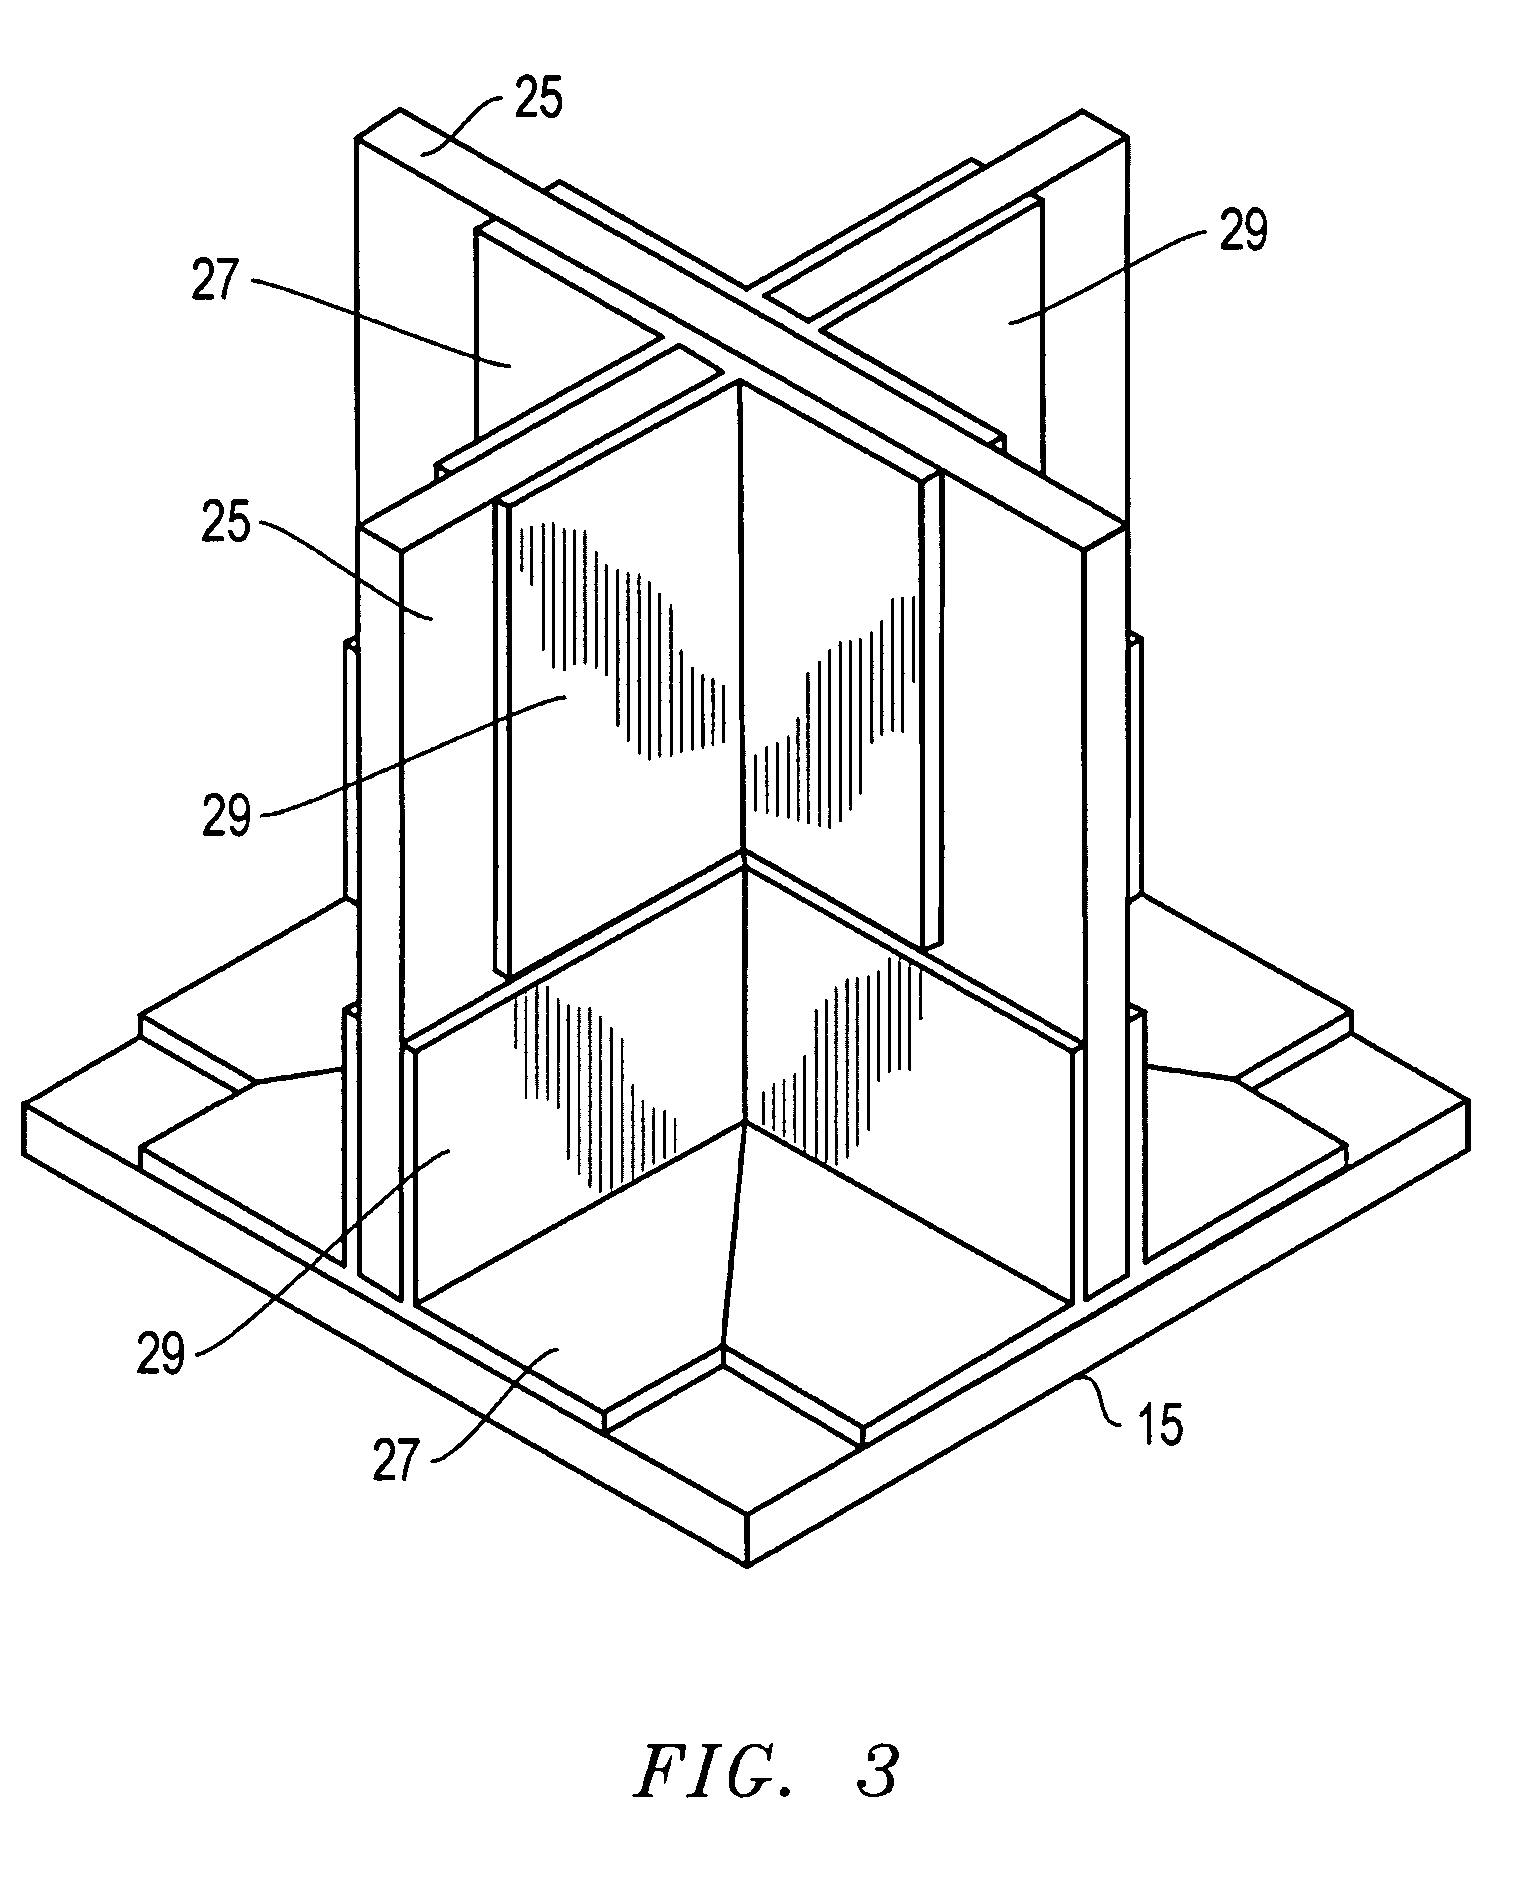 System, method, and apparatus for production-worthy, low cost composite tool fabrication